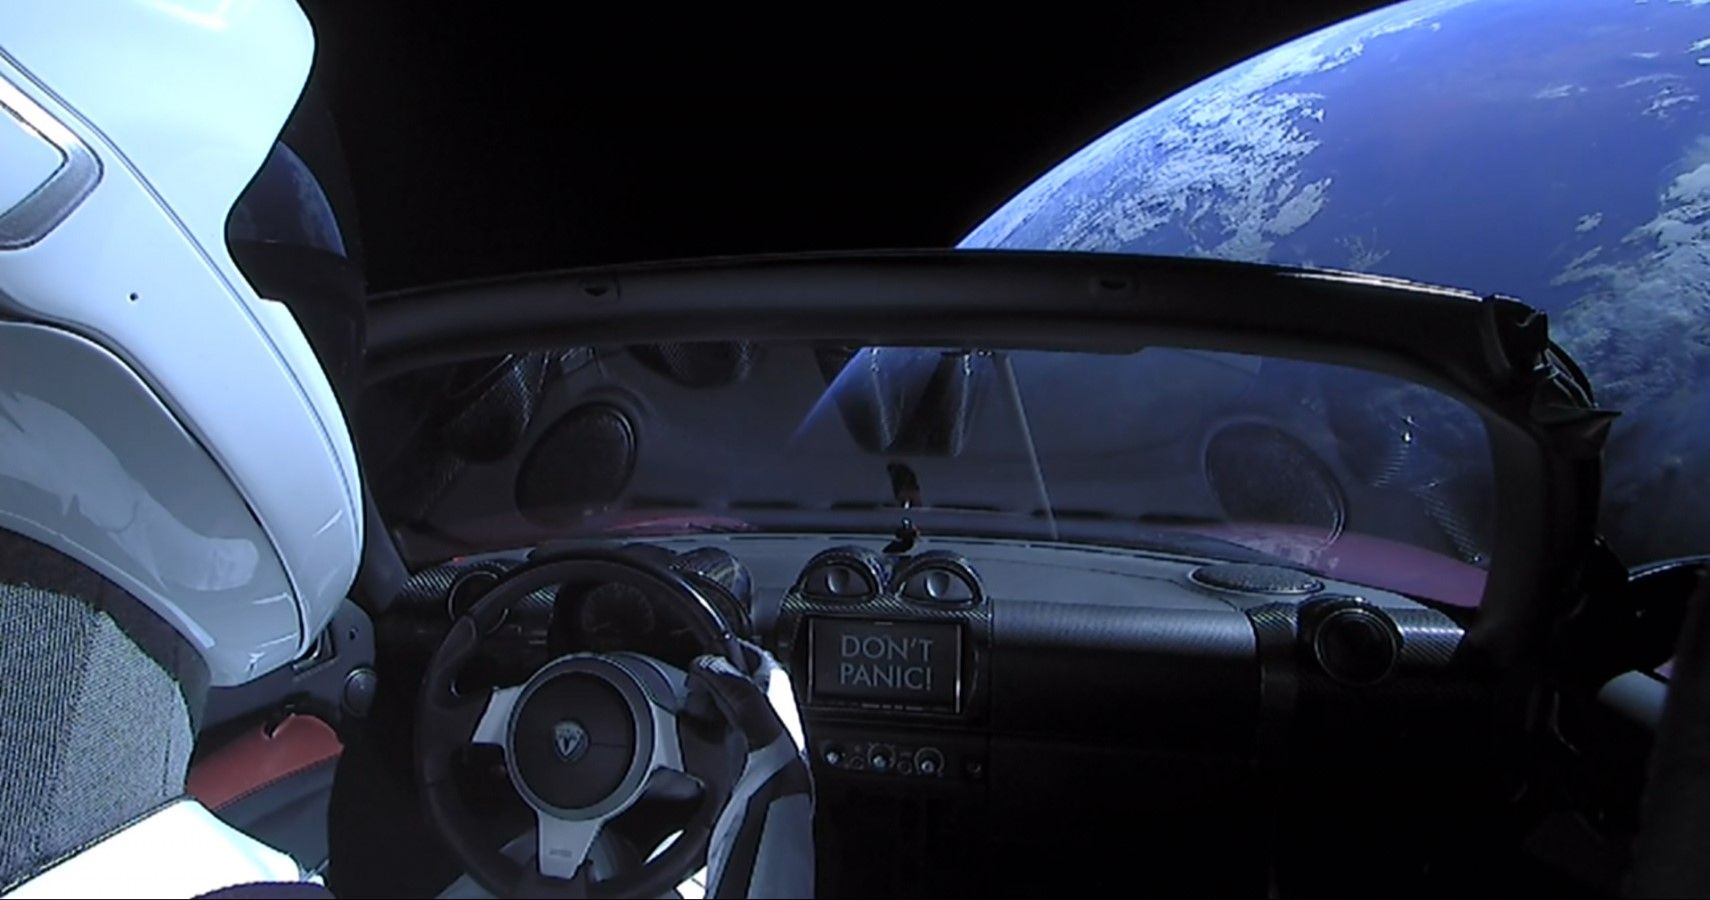 Starman chillin in the Tesla Roadster in space cabin view